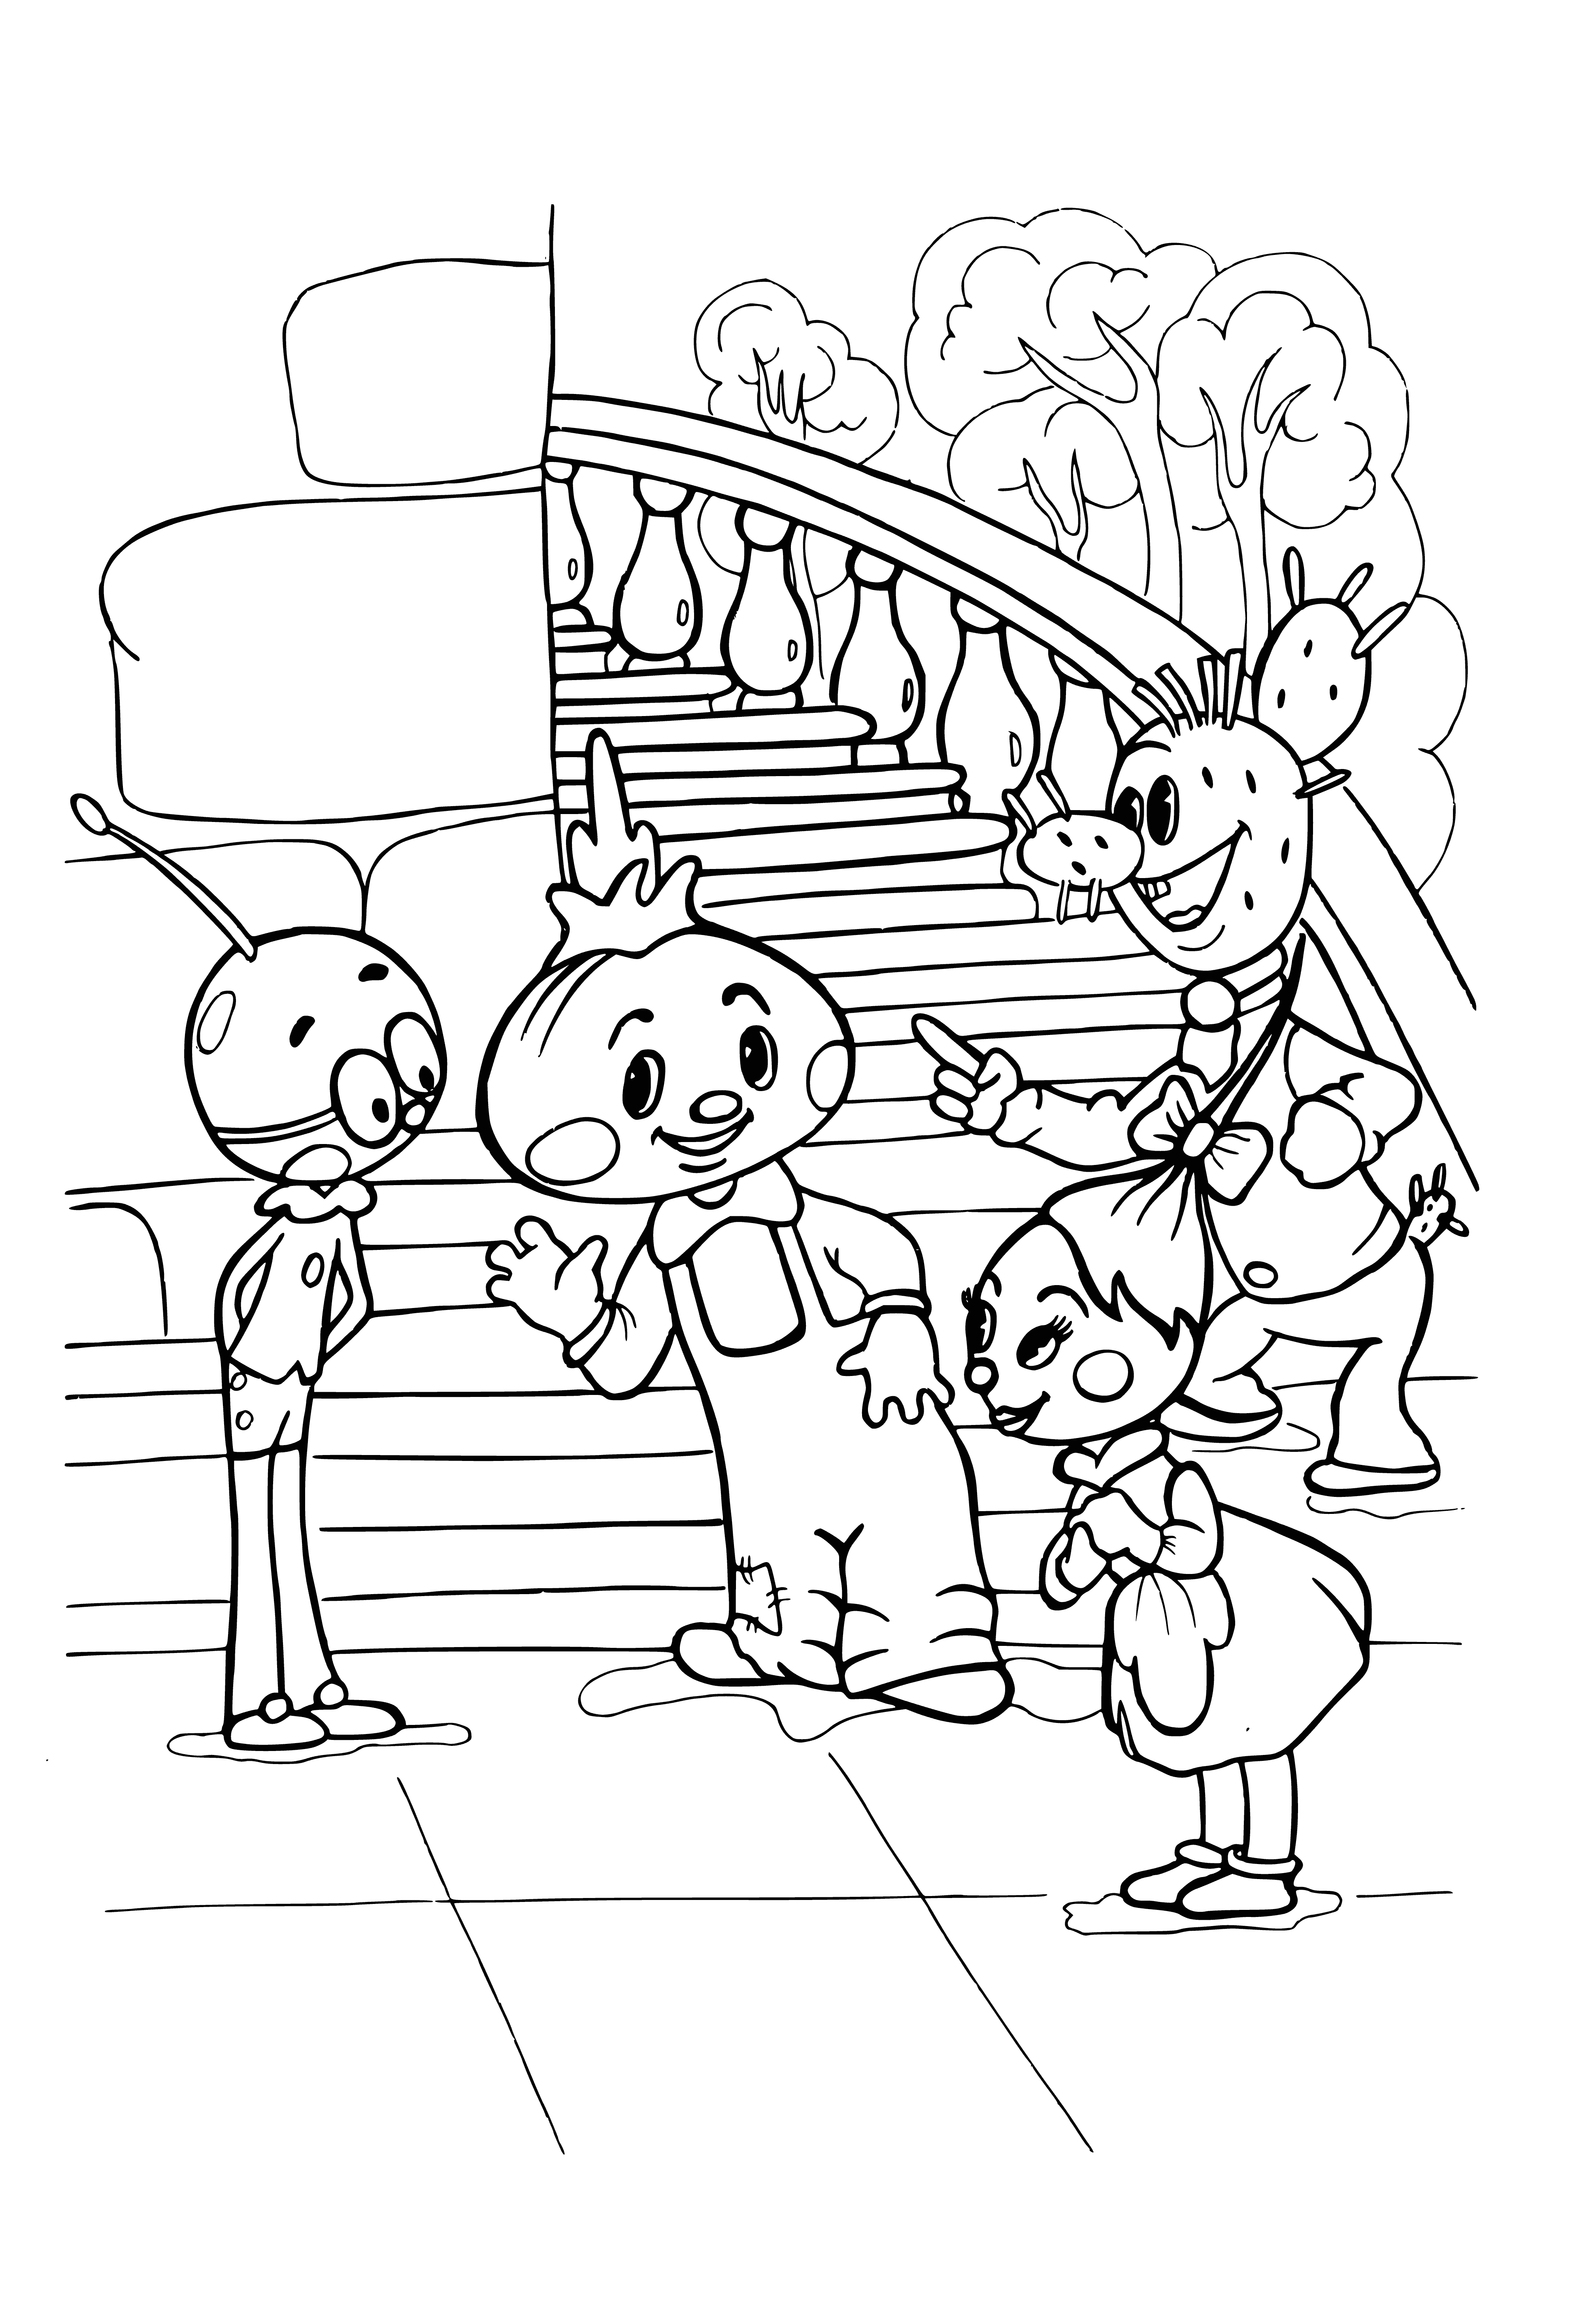 coloring page: Cipollino makes new friends in the woods: animals laughing around a campfire, bringing joy and laughter to him.